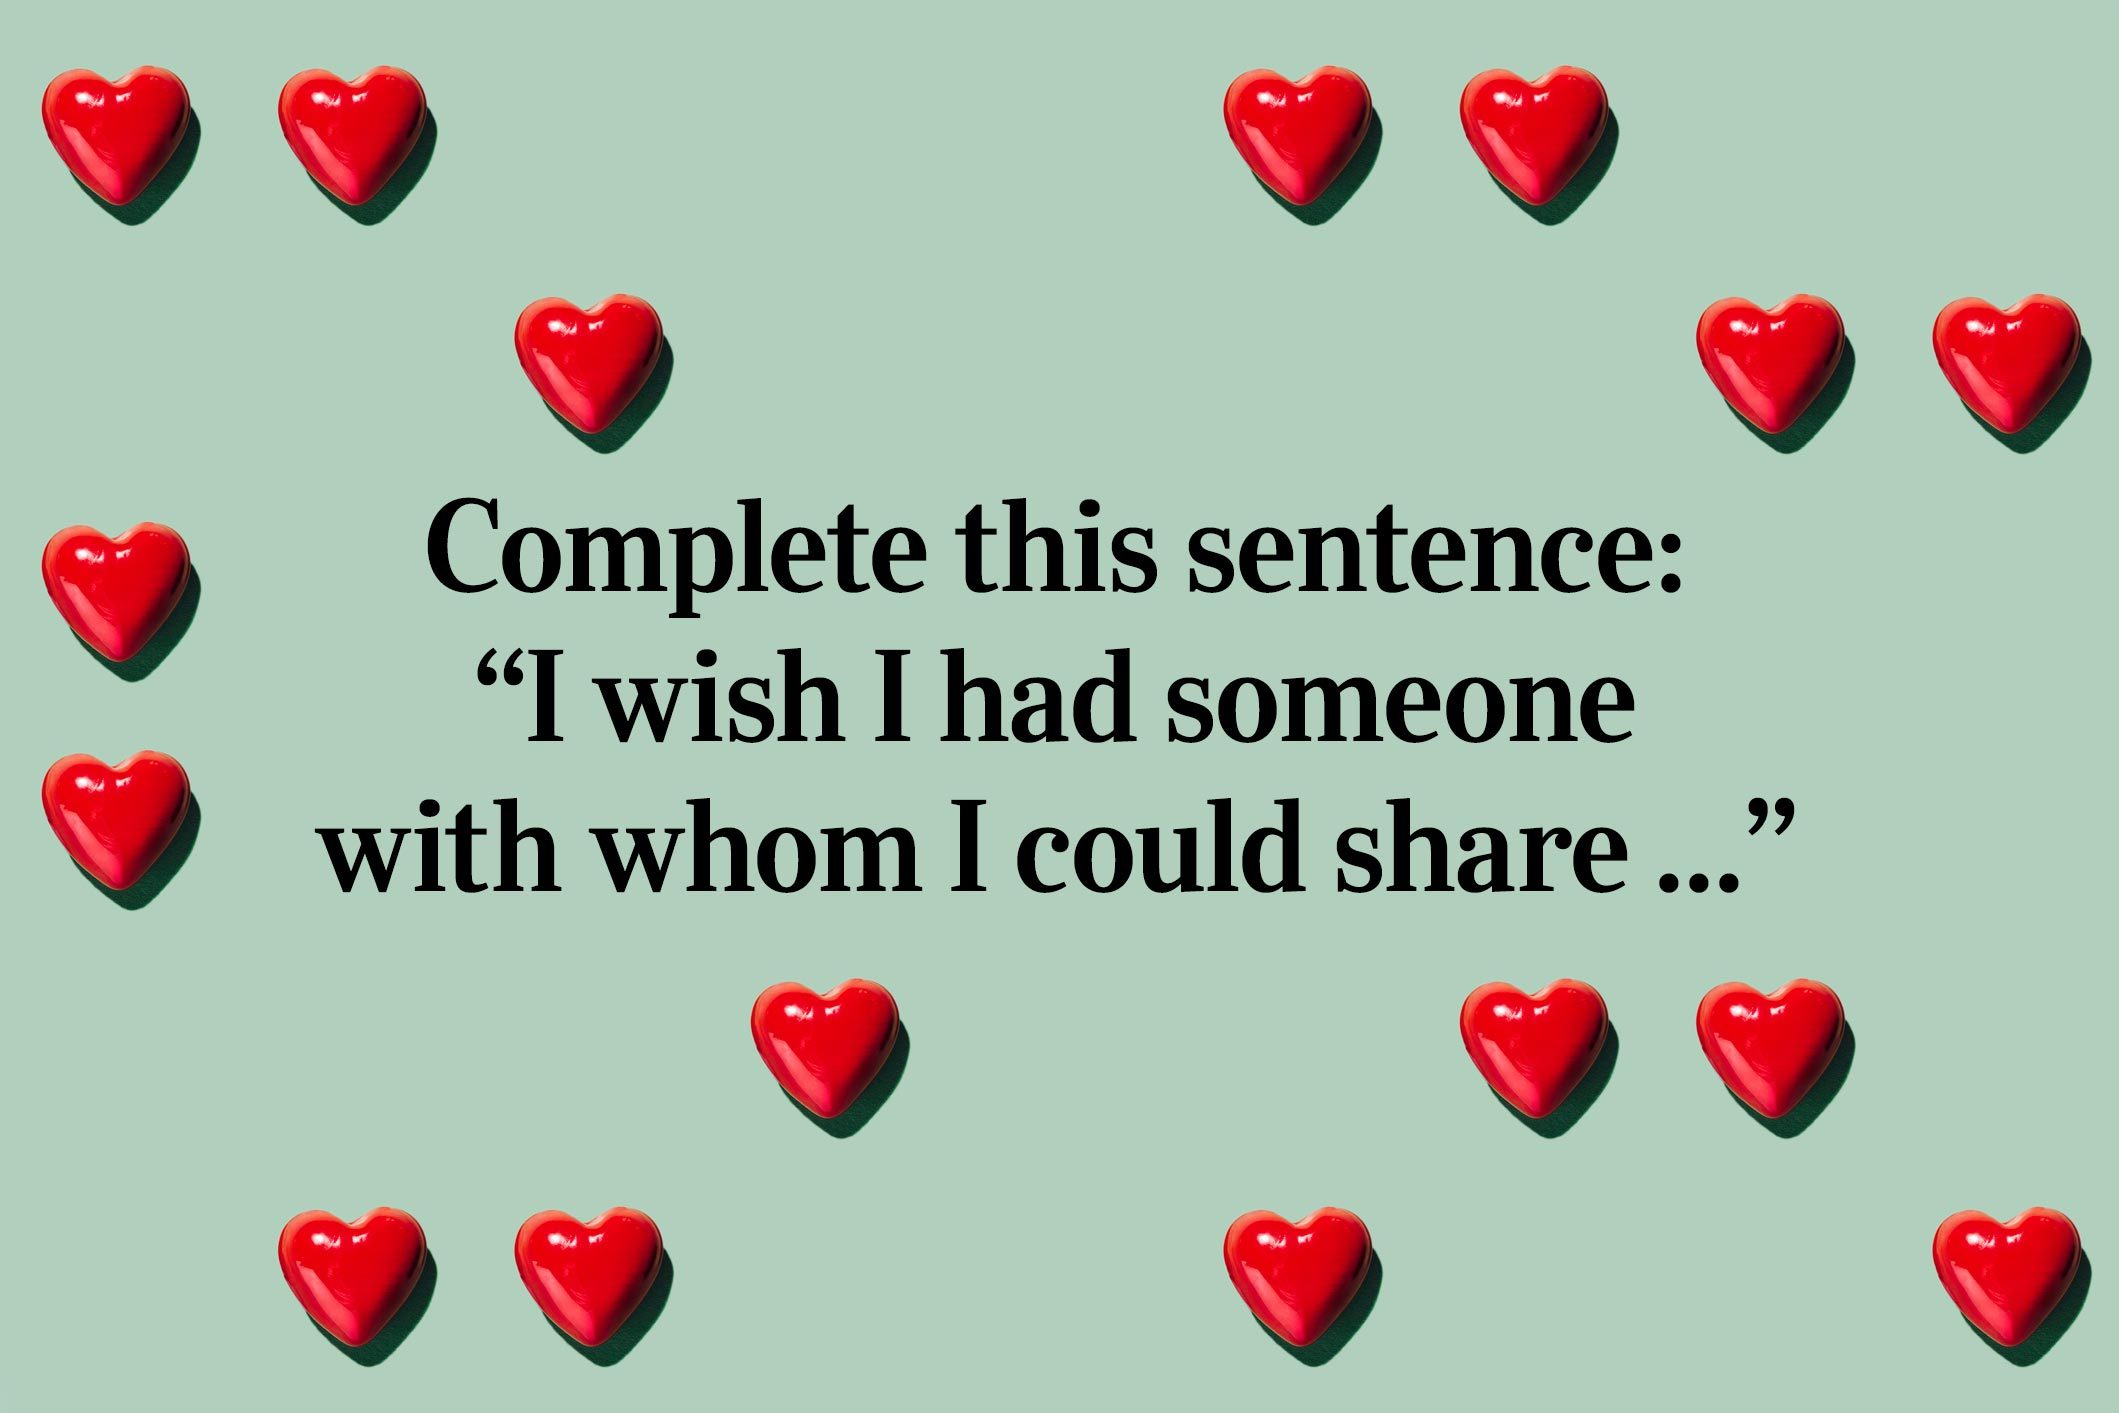 <p>Complete this sentence: “I wish I had someone with whom I could share ..."</p> <p>For example: "I wish I had someone with whom I could share my love of <a href="https://www.rd.com/list/romantic-movies/" rel="noopener">romance movies</a>."</p>